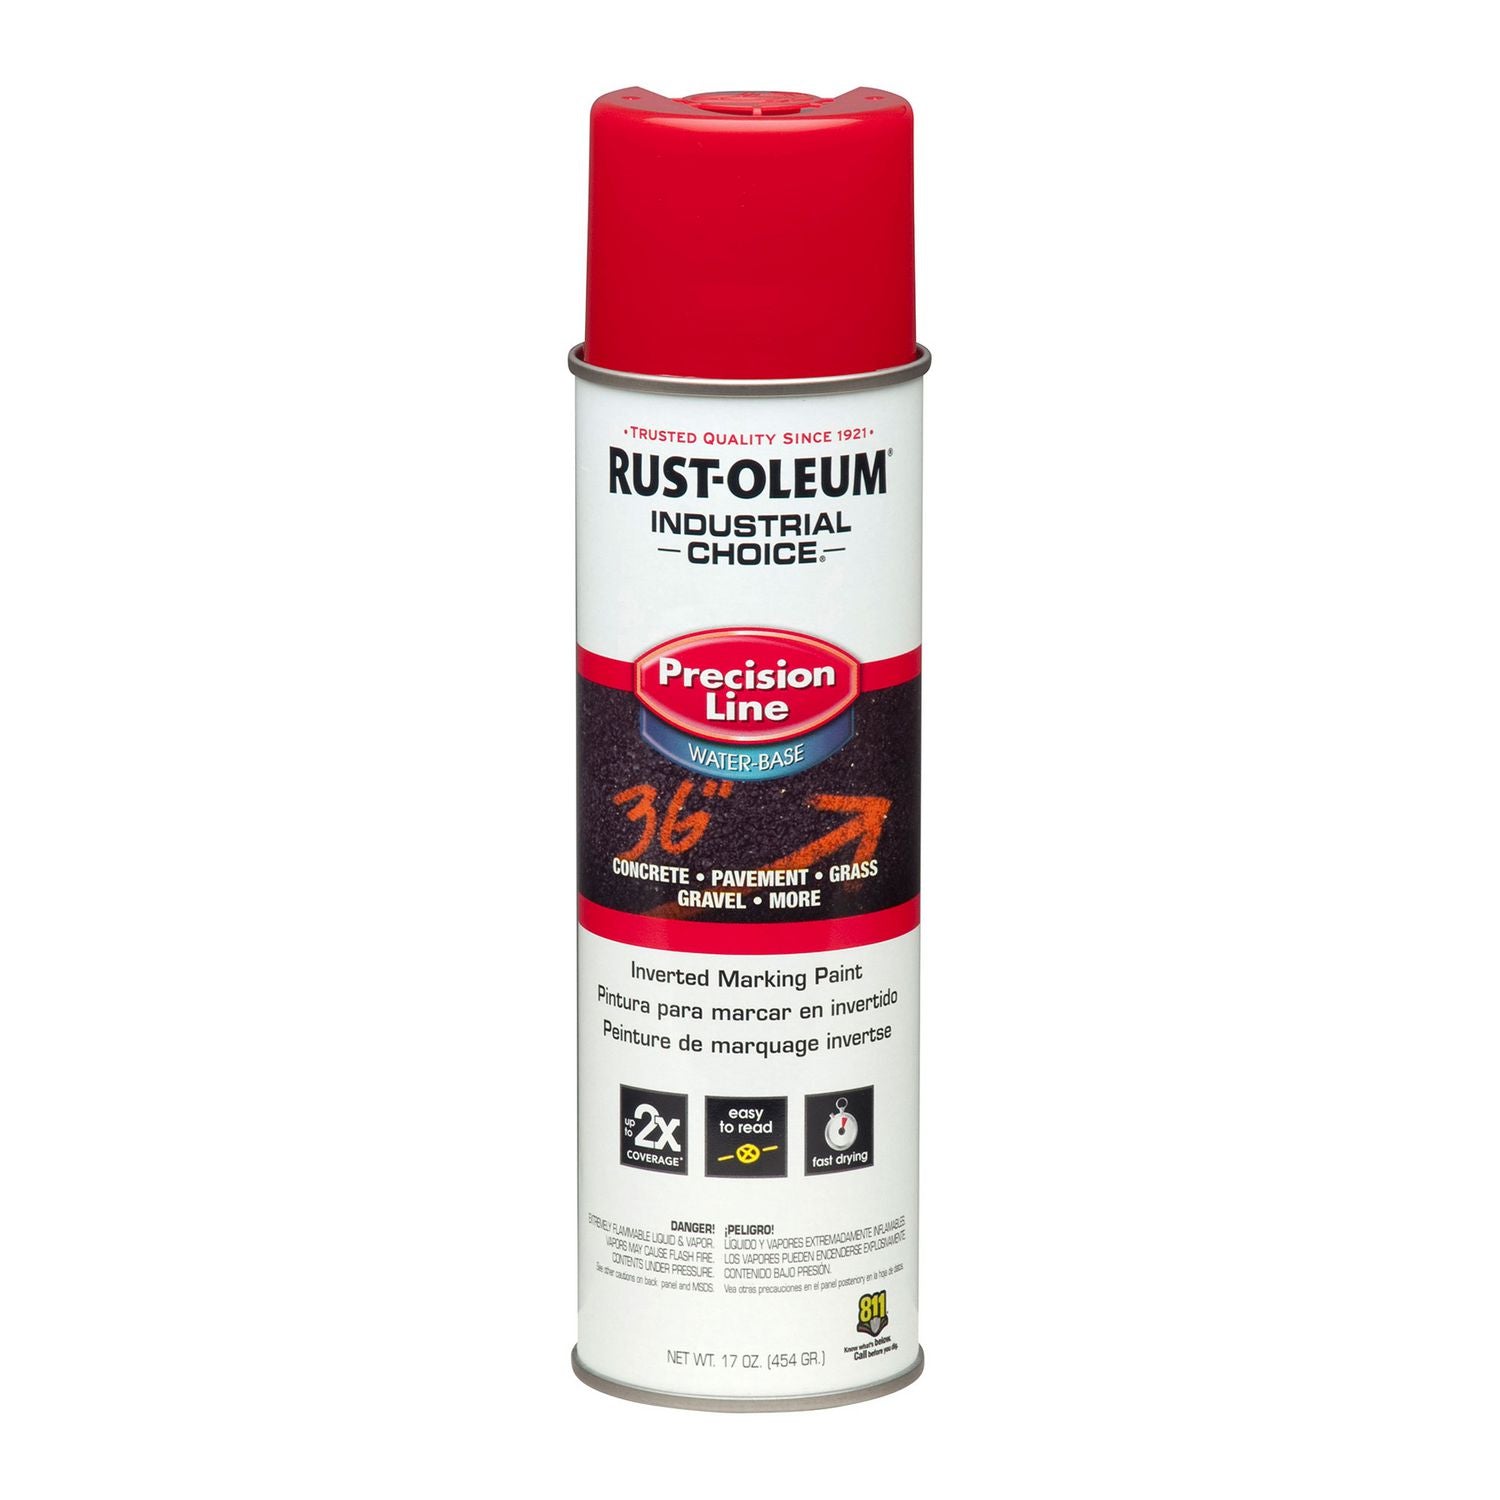 industrial-choice-m1800-system-water-based-precision-line-marking-paint-flat-safety-red-17-oz-aerosol-can-12-carton_rst203038ct - 1